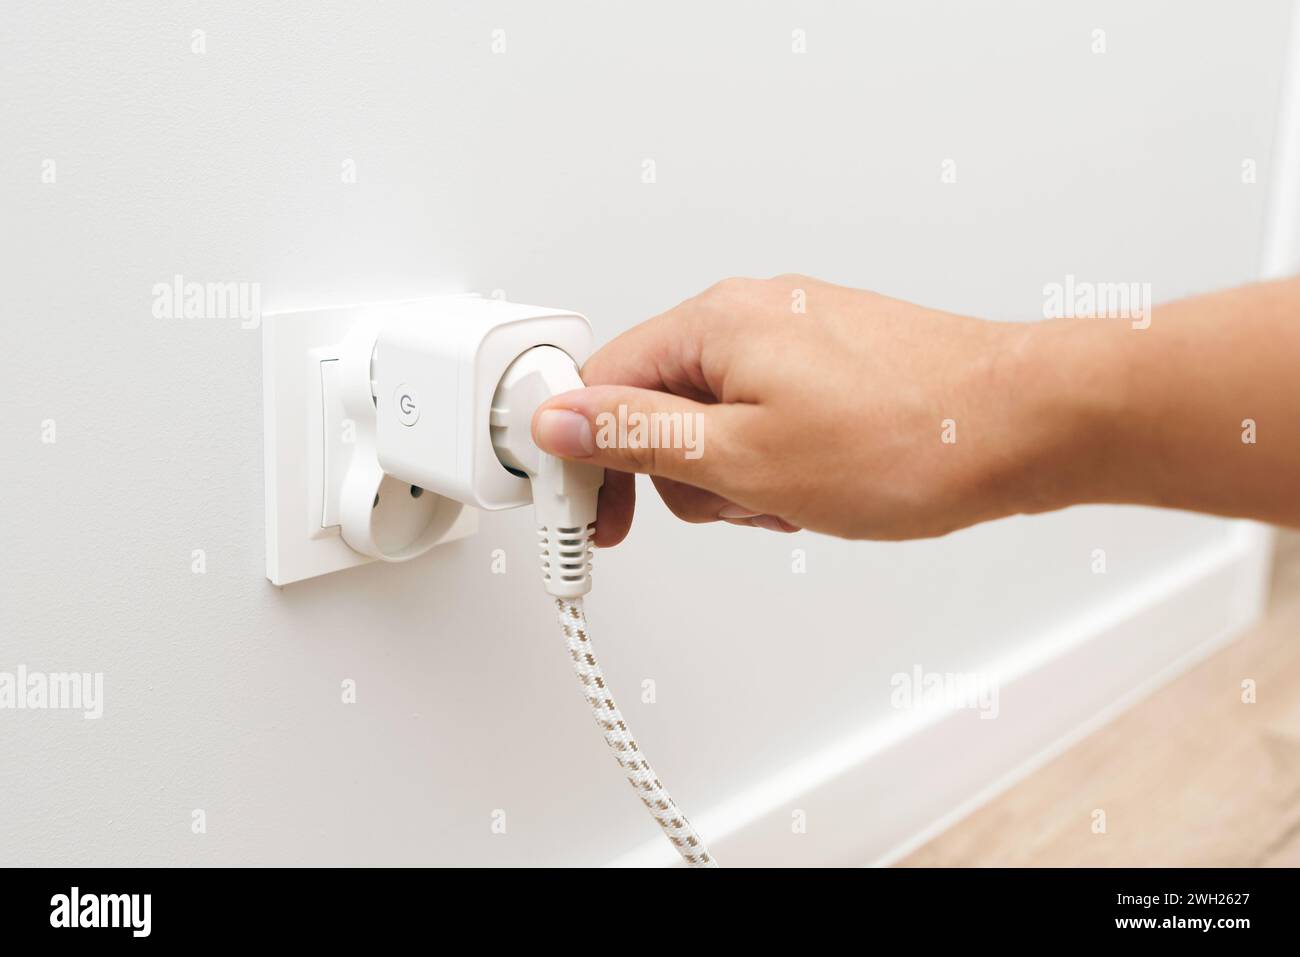 Man uses an electrical socket, smart plug into the socket. Control of electricity expenses Stock Photo